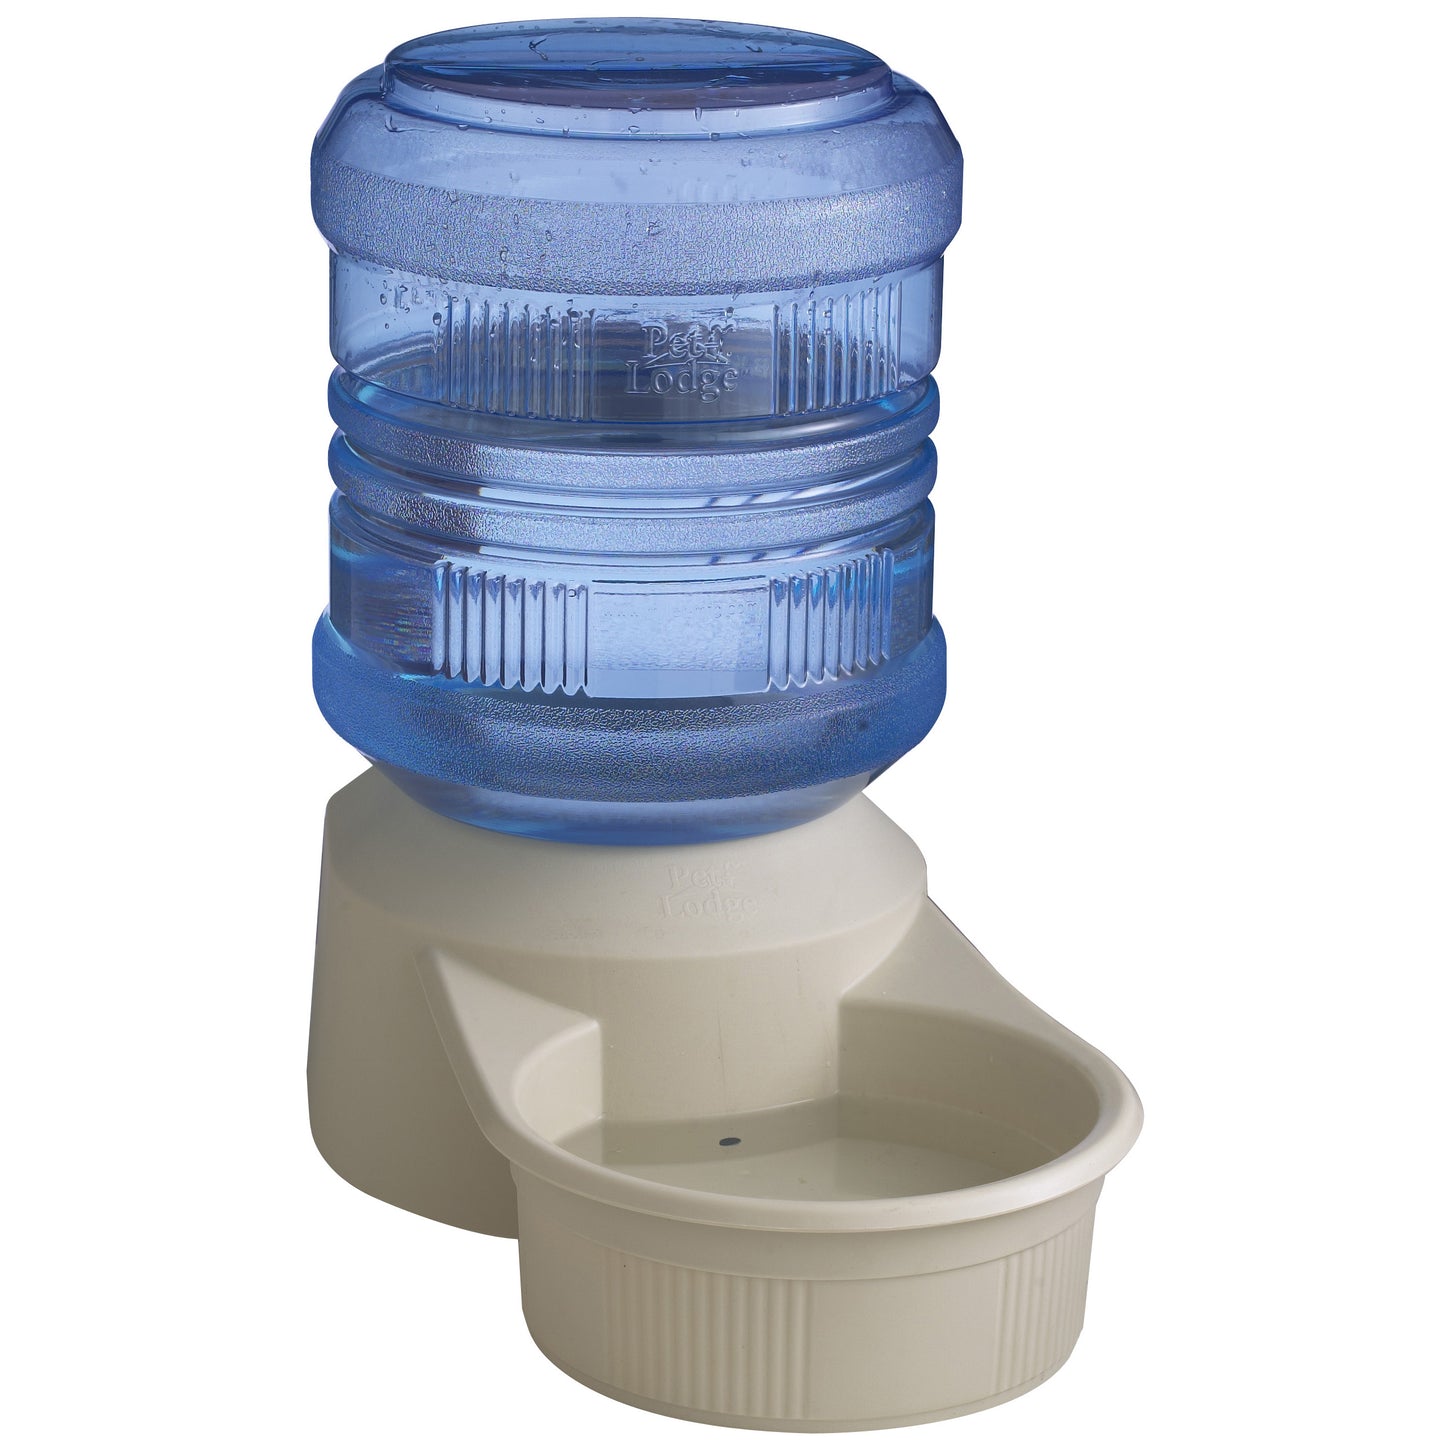 Pet Lodge™ 16 Quart Water Tower Deluxe